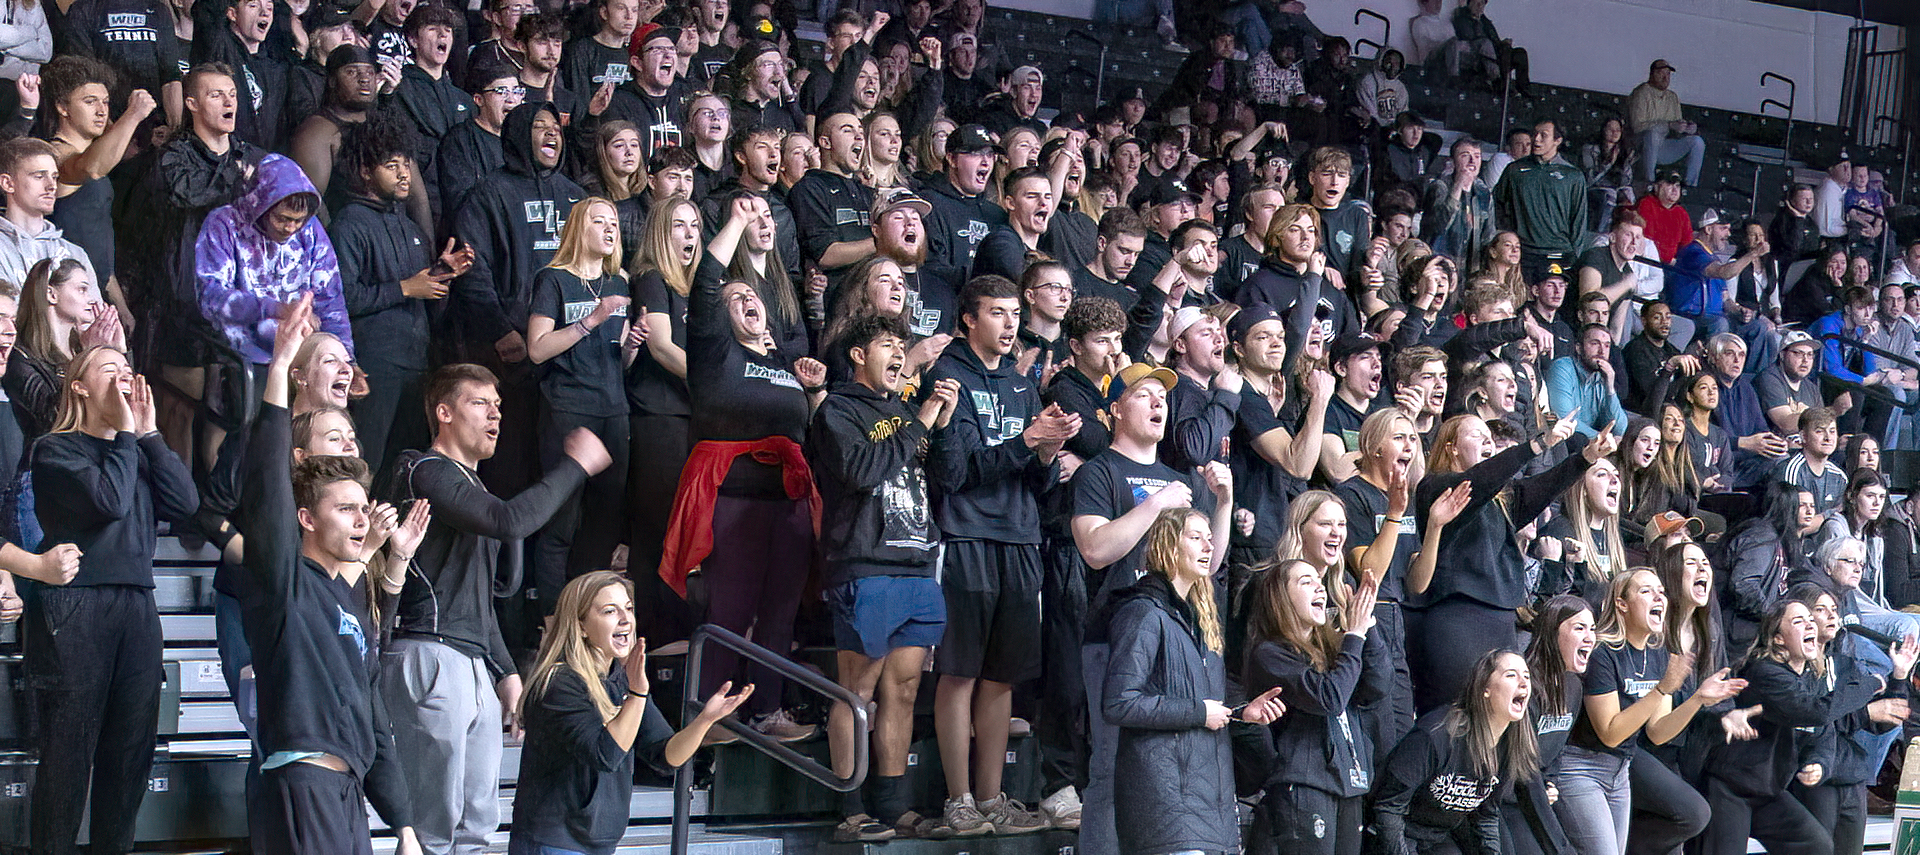 Crowd of students cheering during basketball game